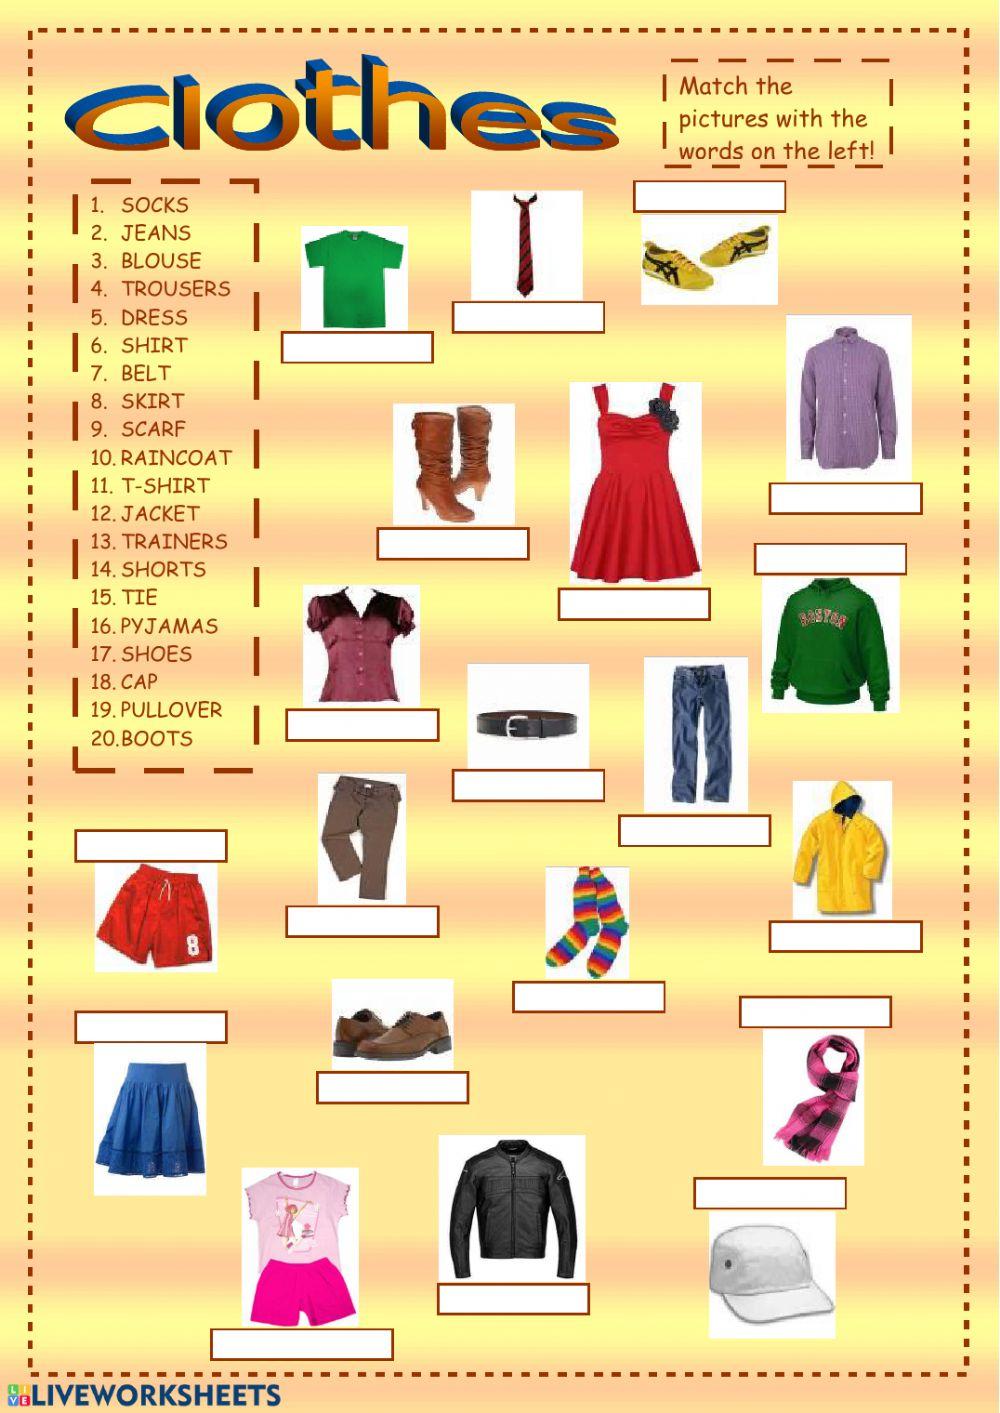 Clothes interactive exercise for ELEMENTARY